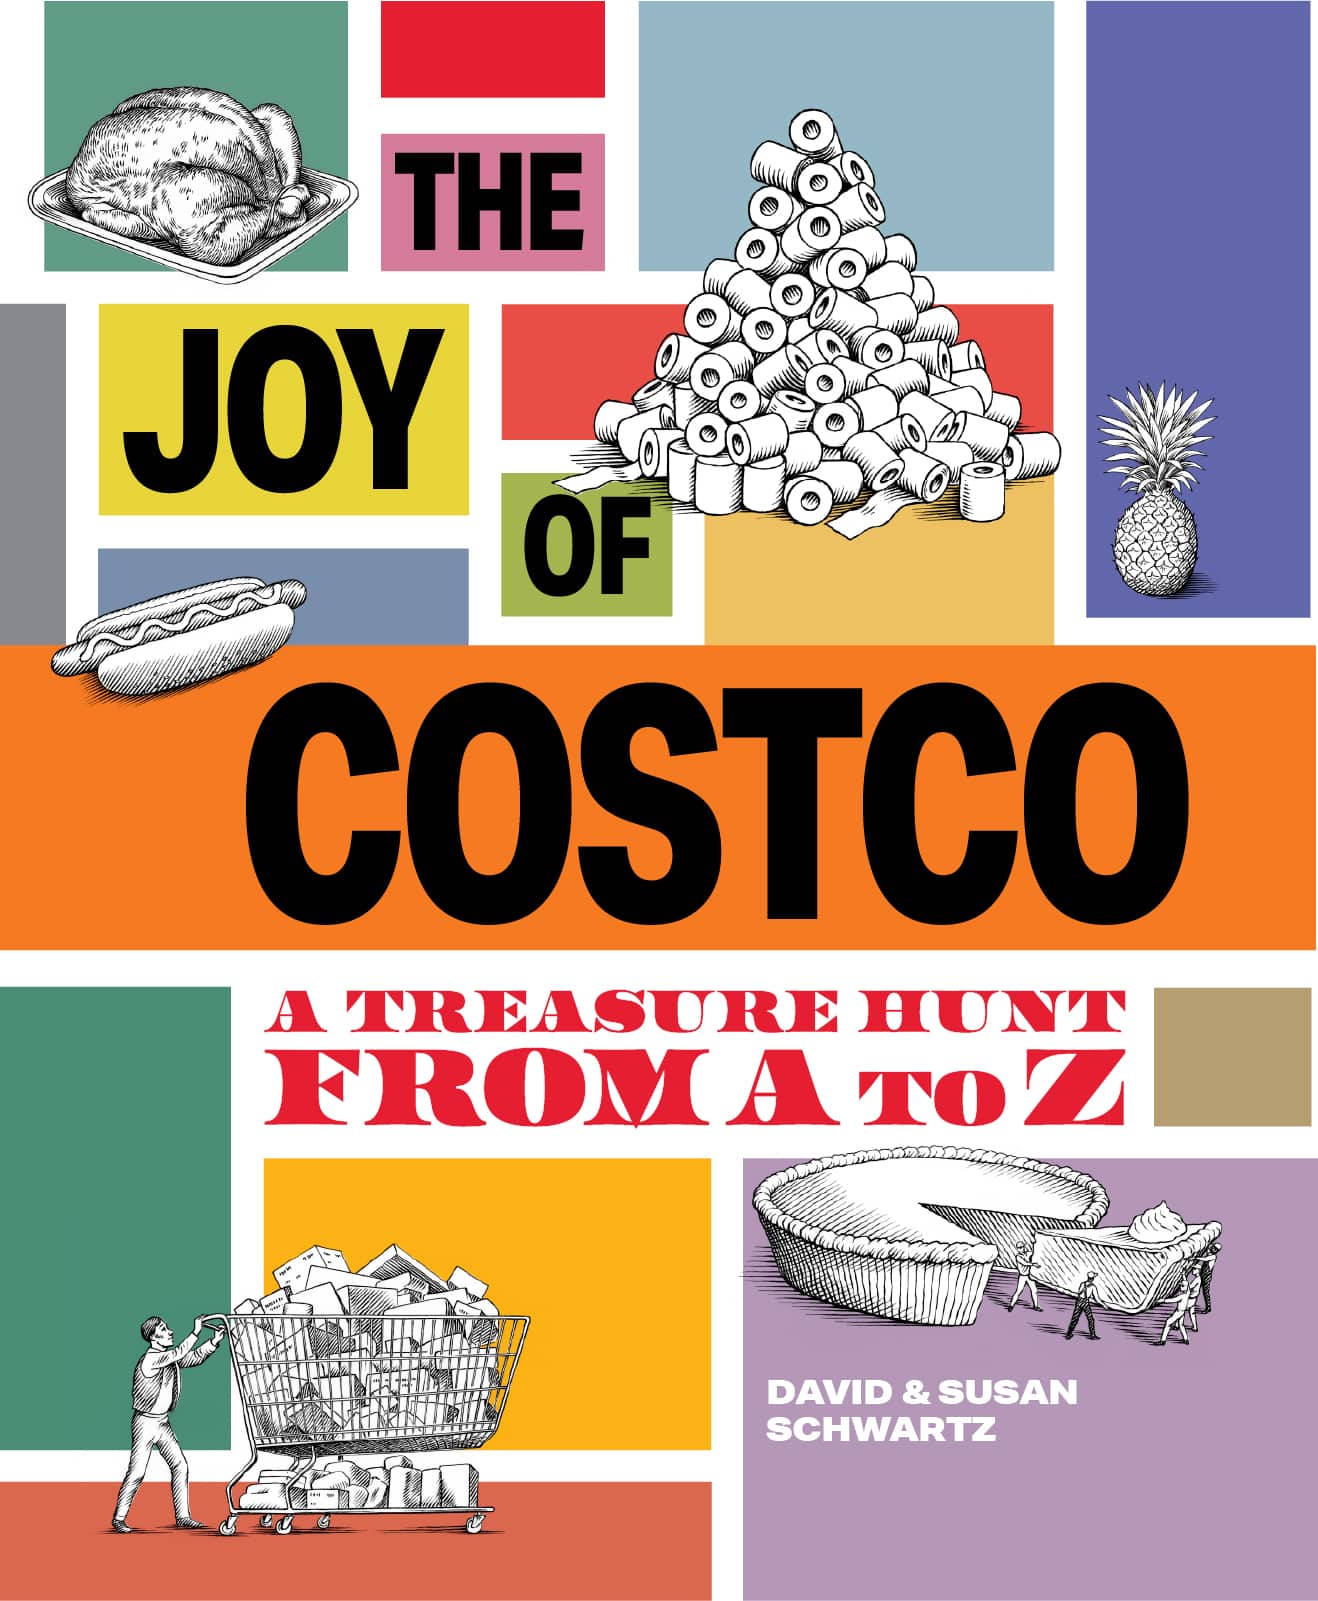 The Joy of Costco - A Treasure Hunt from A to Z